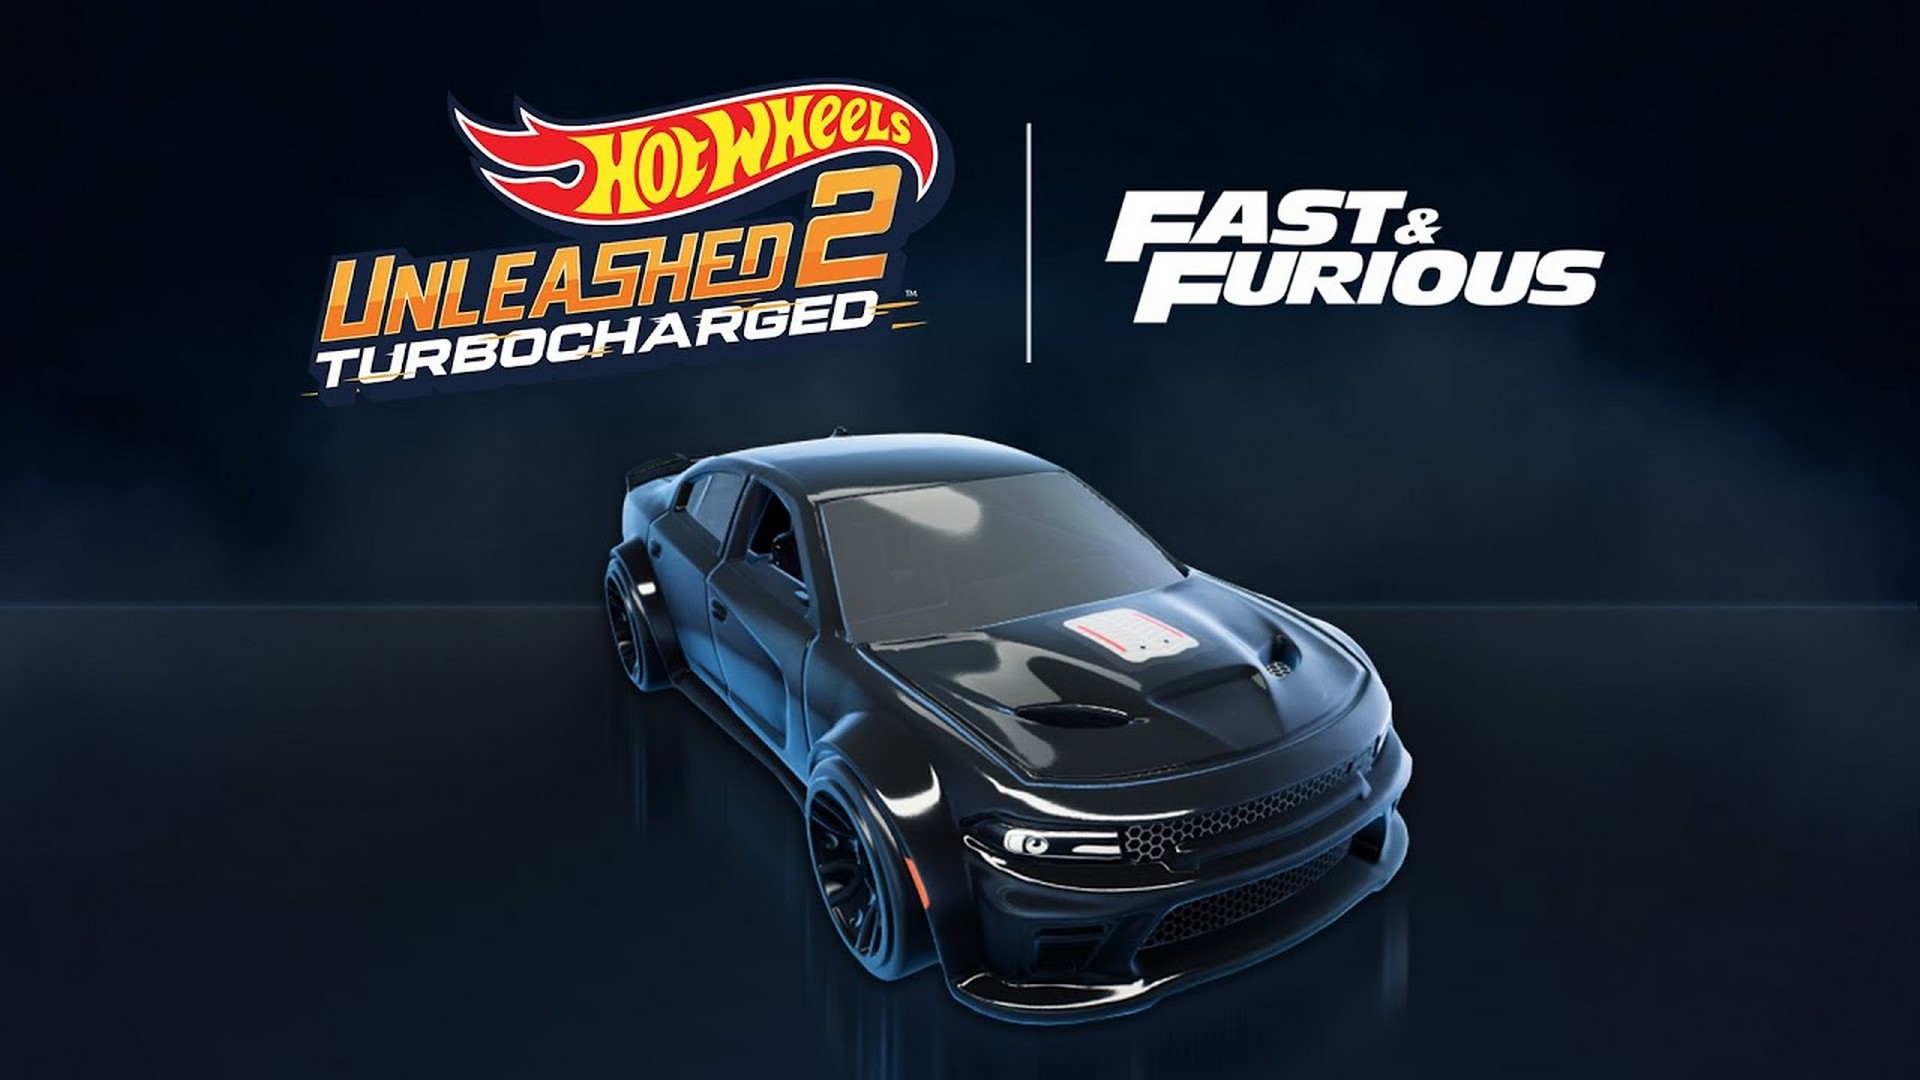 Hot Wheels Unleashed 2 – Turbocharged To Include Vehicles From The Fast & Furious Saga